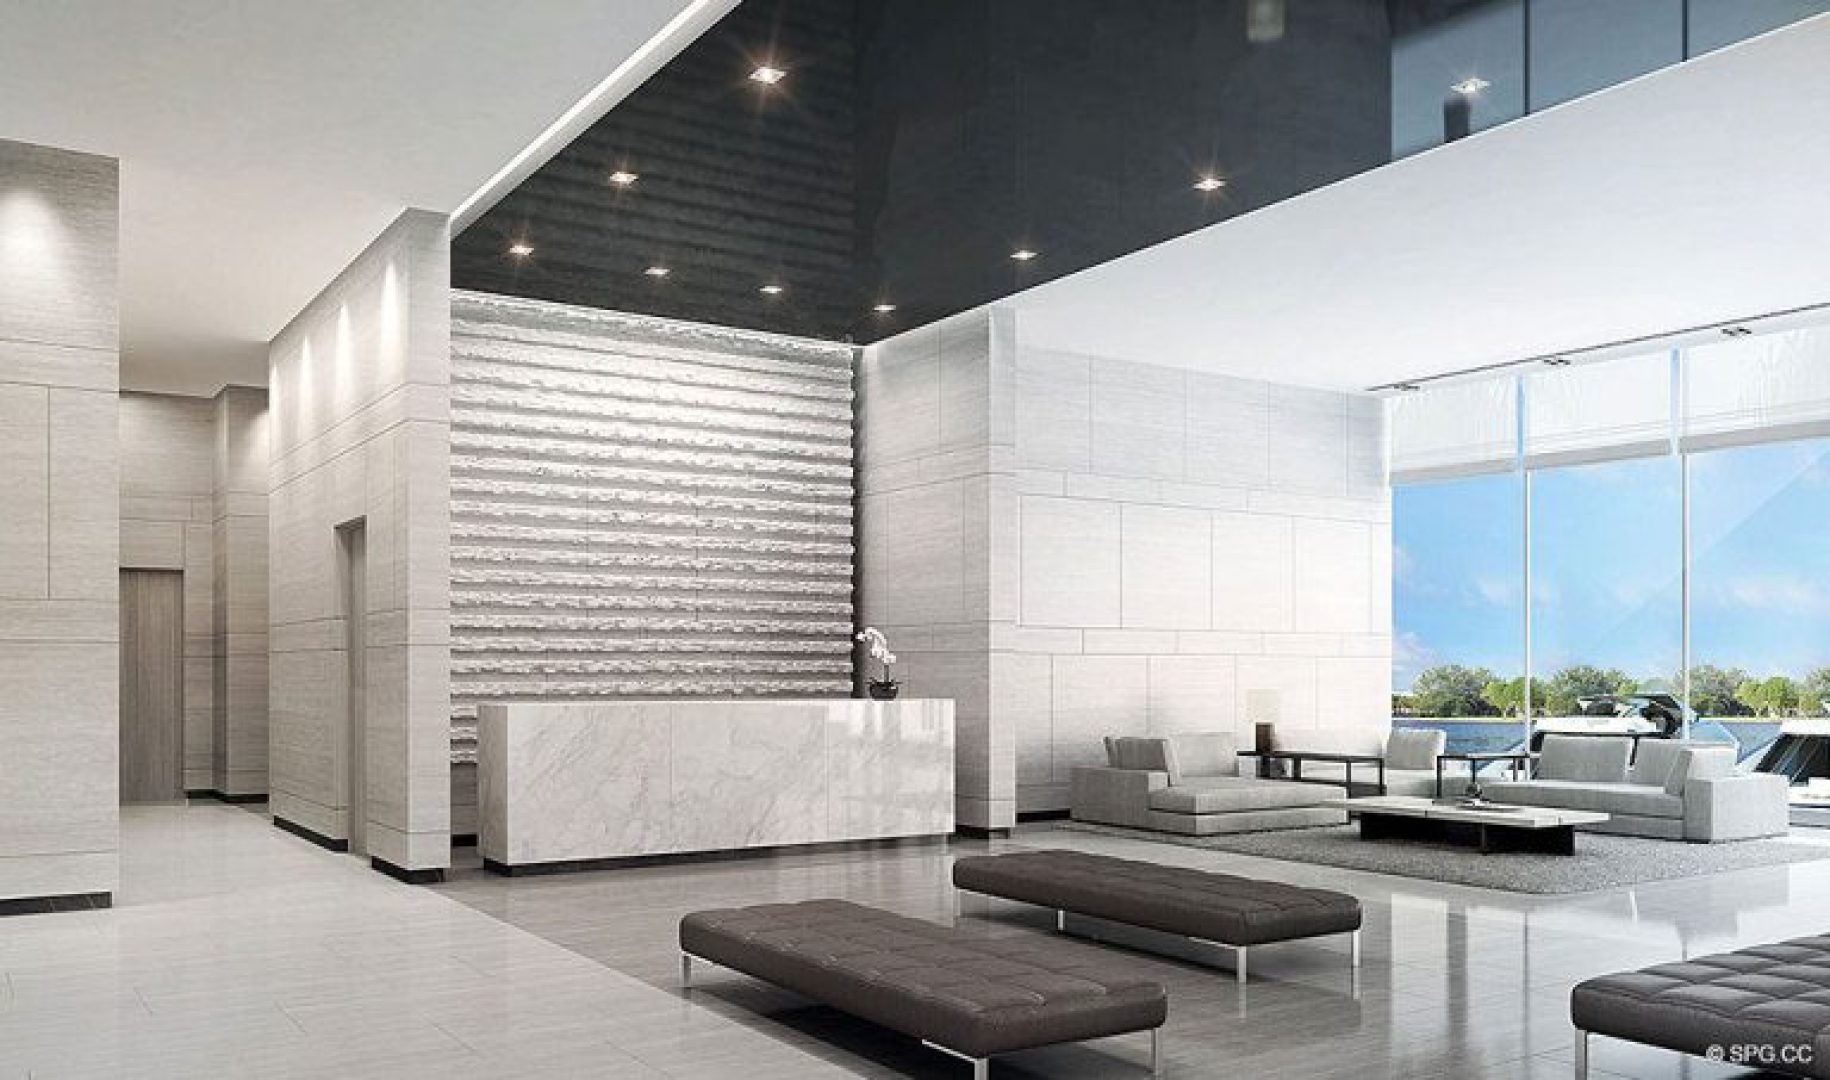 Lobby Reception Design for Riva, Luxury Waterfront Condos in Fort Lauderdale, Florida 33304.